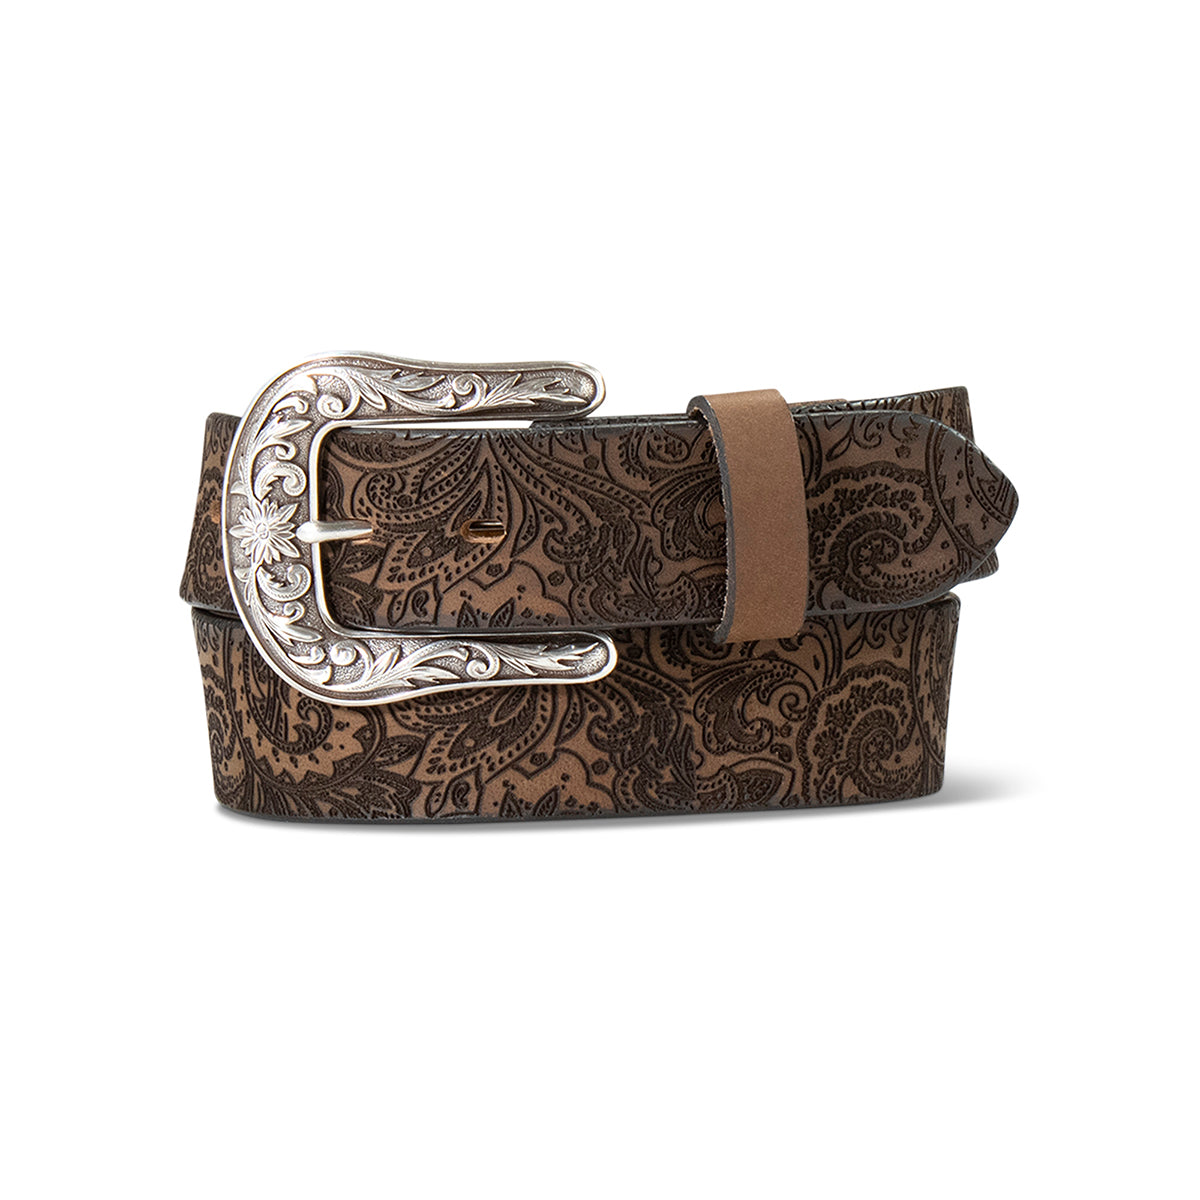 Ariat Women's Scroll Embossed Buckle Belt, Brown, Small at